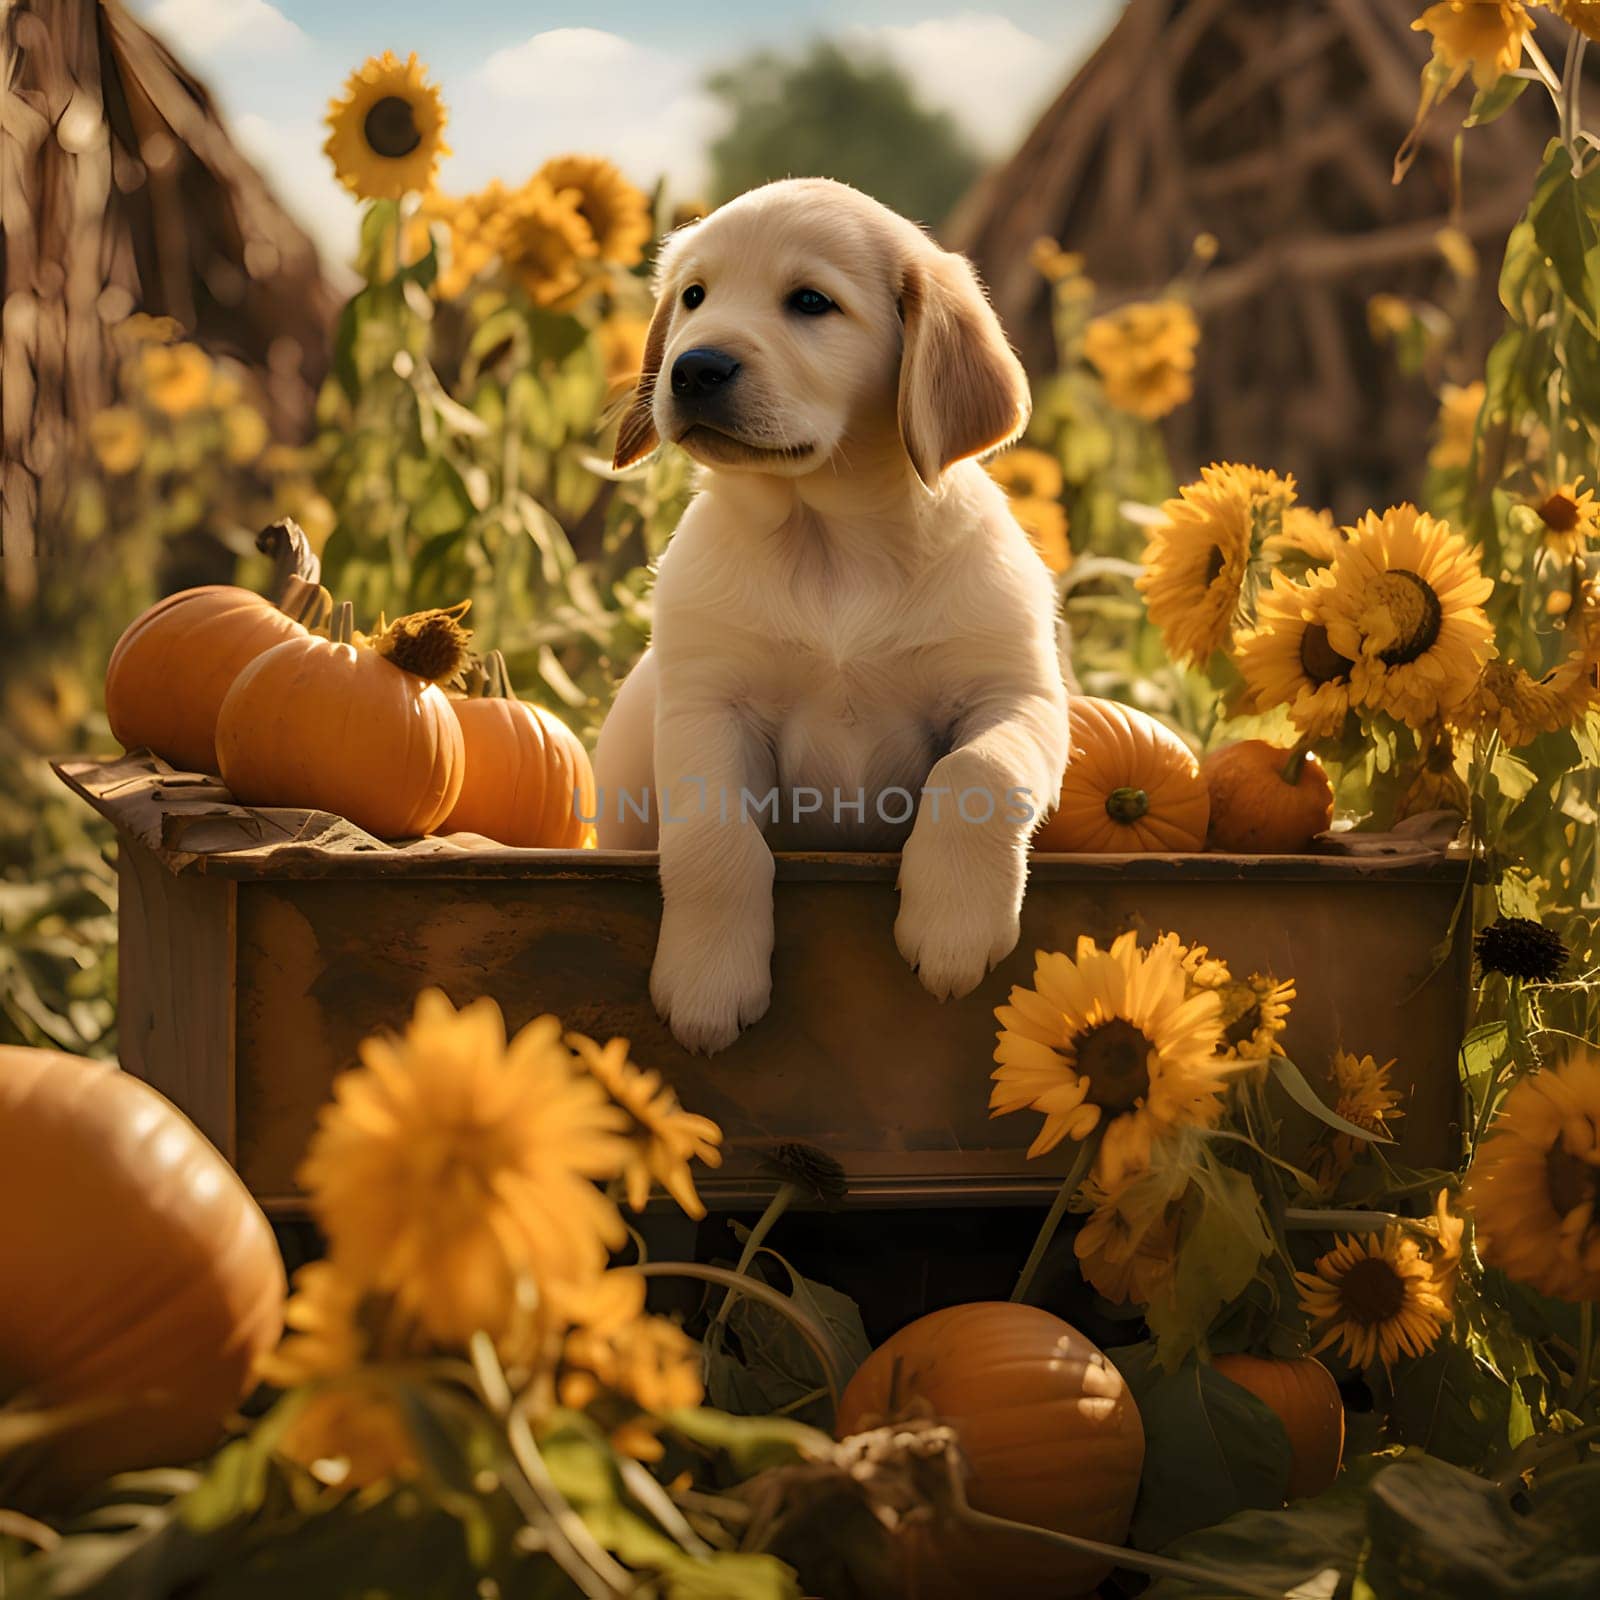 A tiny dog in a wooden box around sunflowers and pumpkins ś rays of sunshine. Pumpkin as a dish of thanksgiving for the harvest. by ThemesS